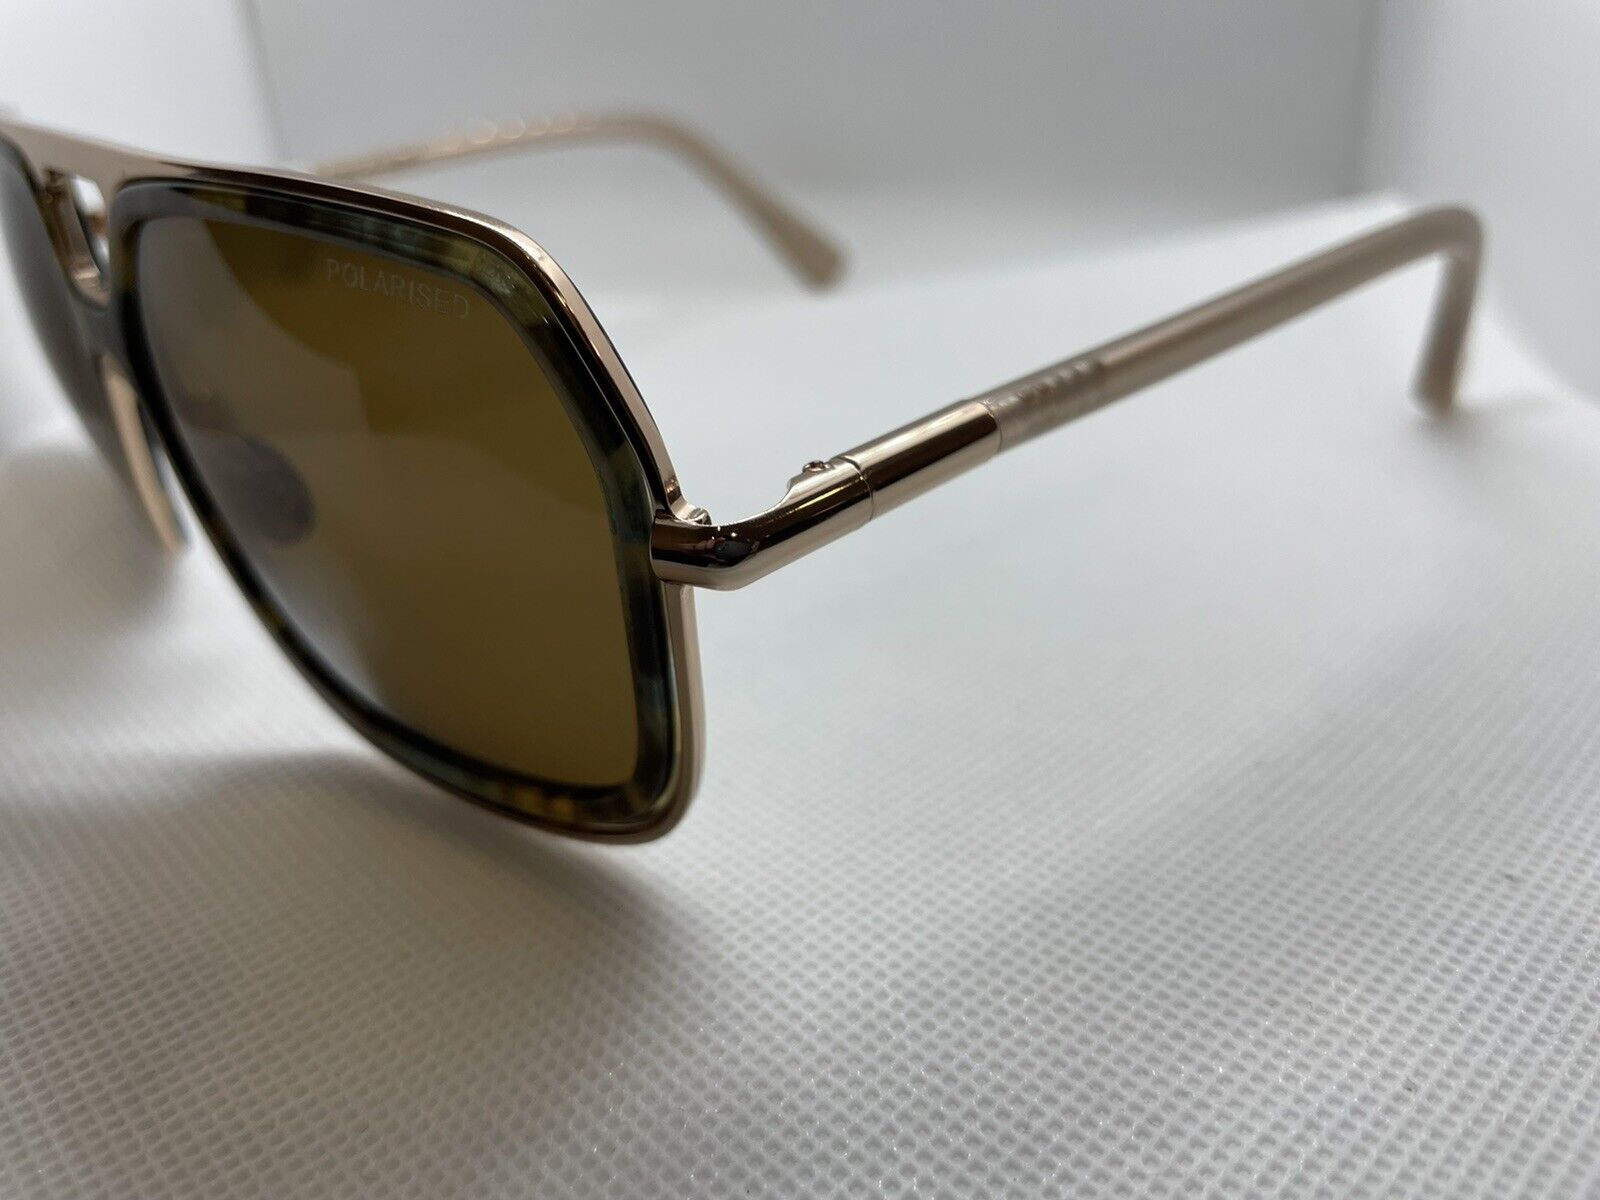 Brand New Authentic CUTLER AND GROSS OF LONDON Sunglasses M : 1176 C : MDT01